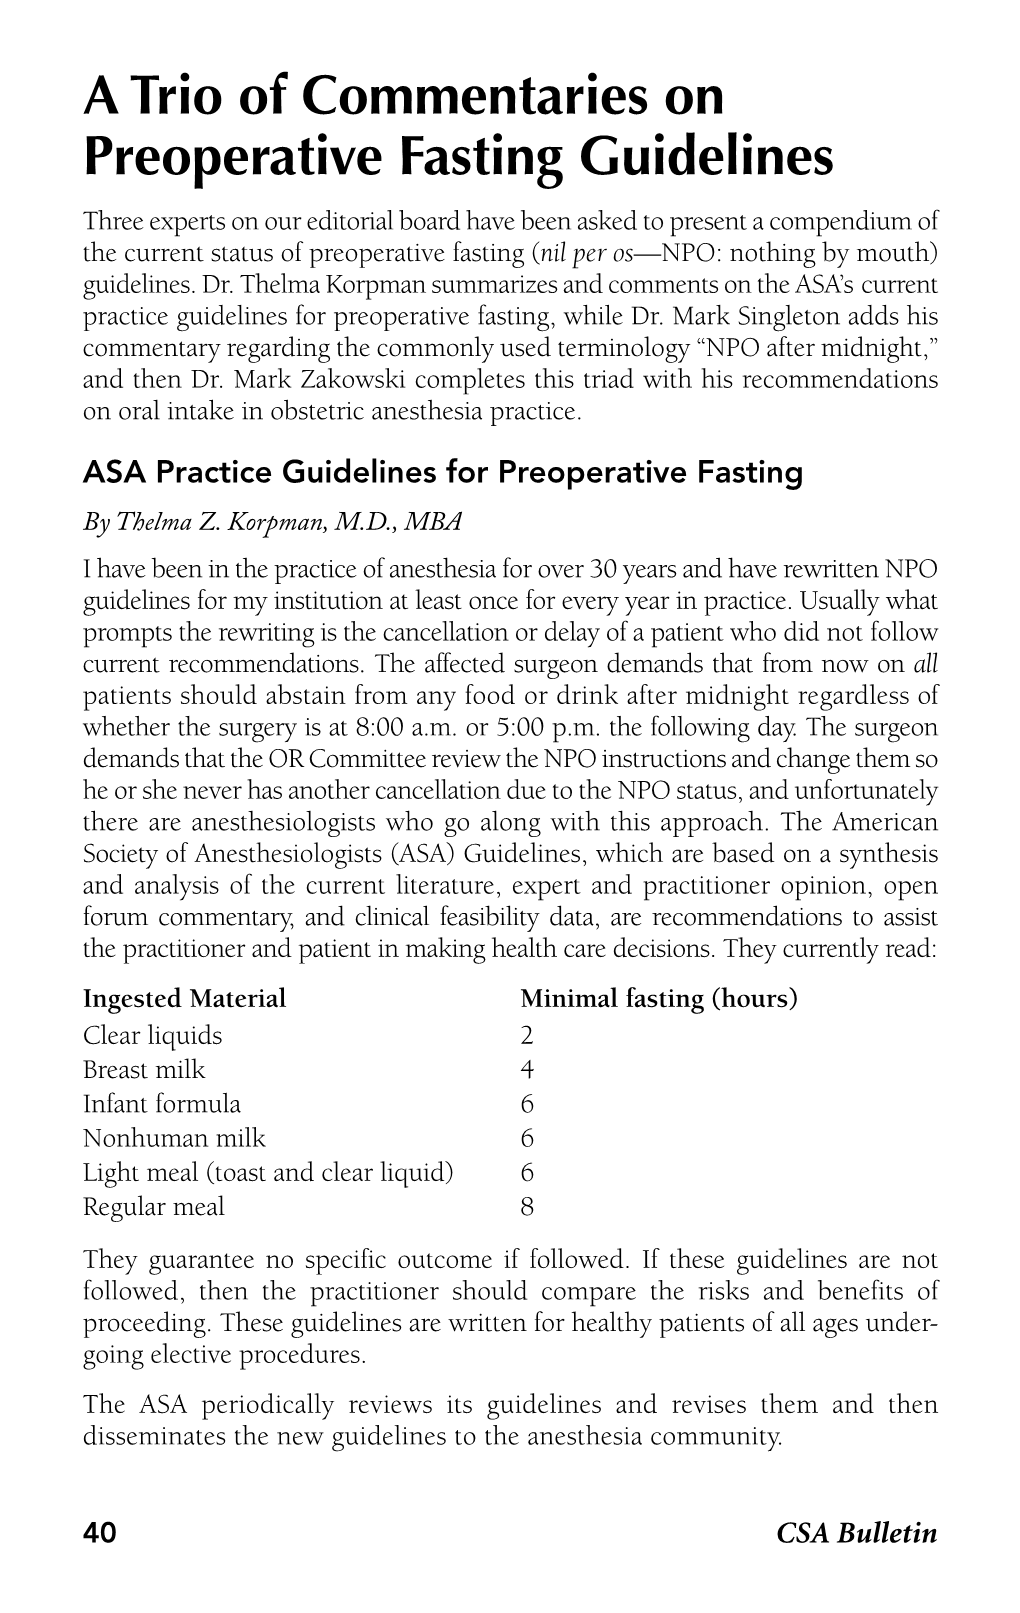 A Trio of Commentaries on Preoperative Fasting Guidelines